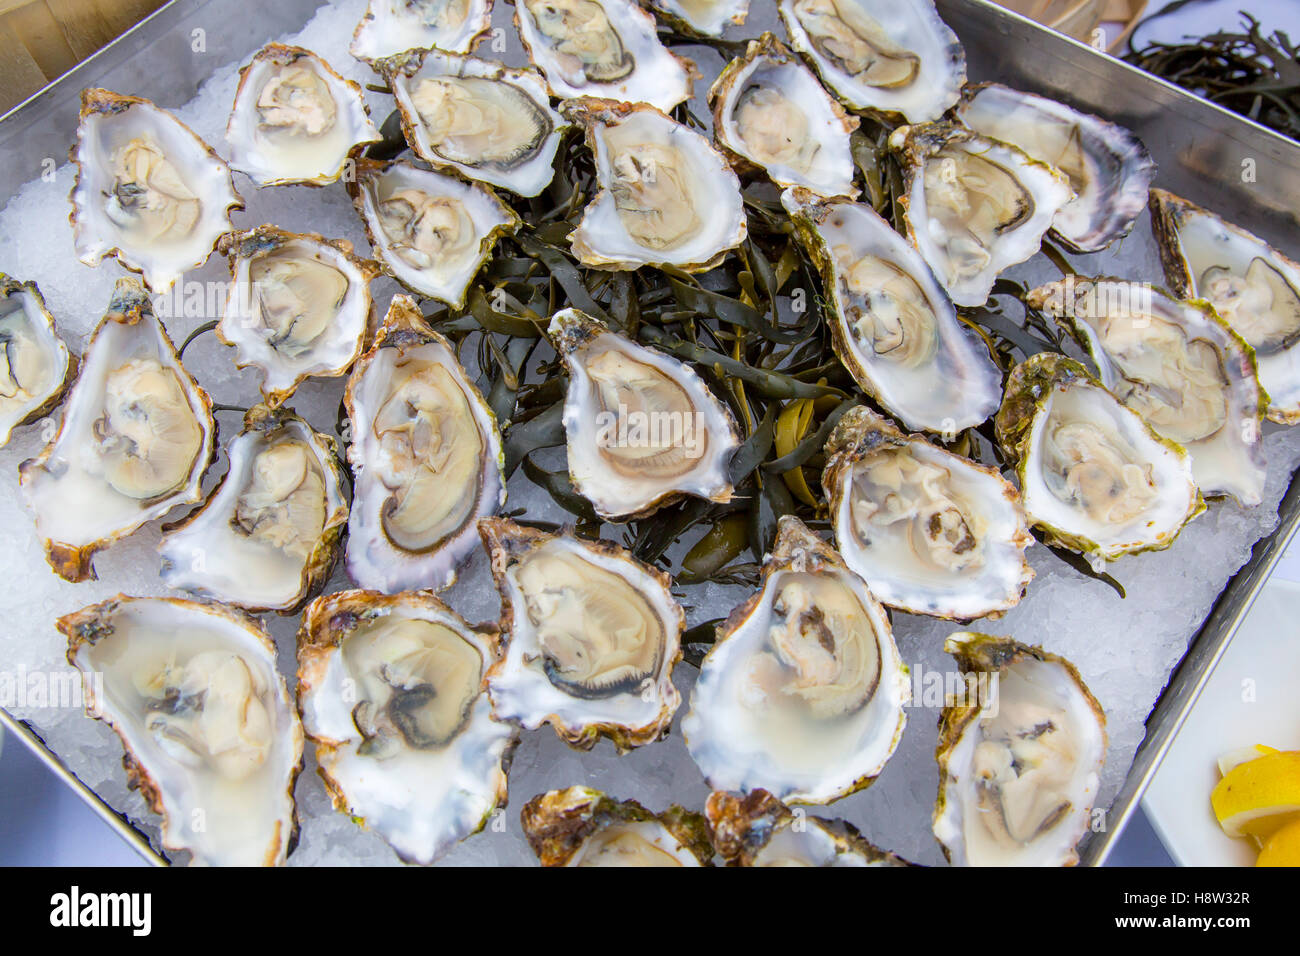 Oysters, on ice, open, Stock Photo